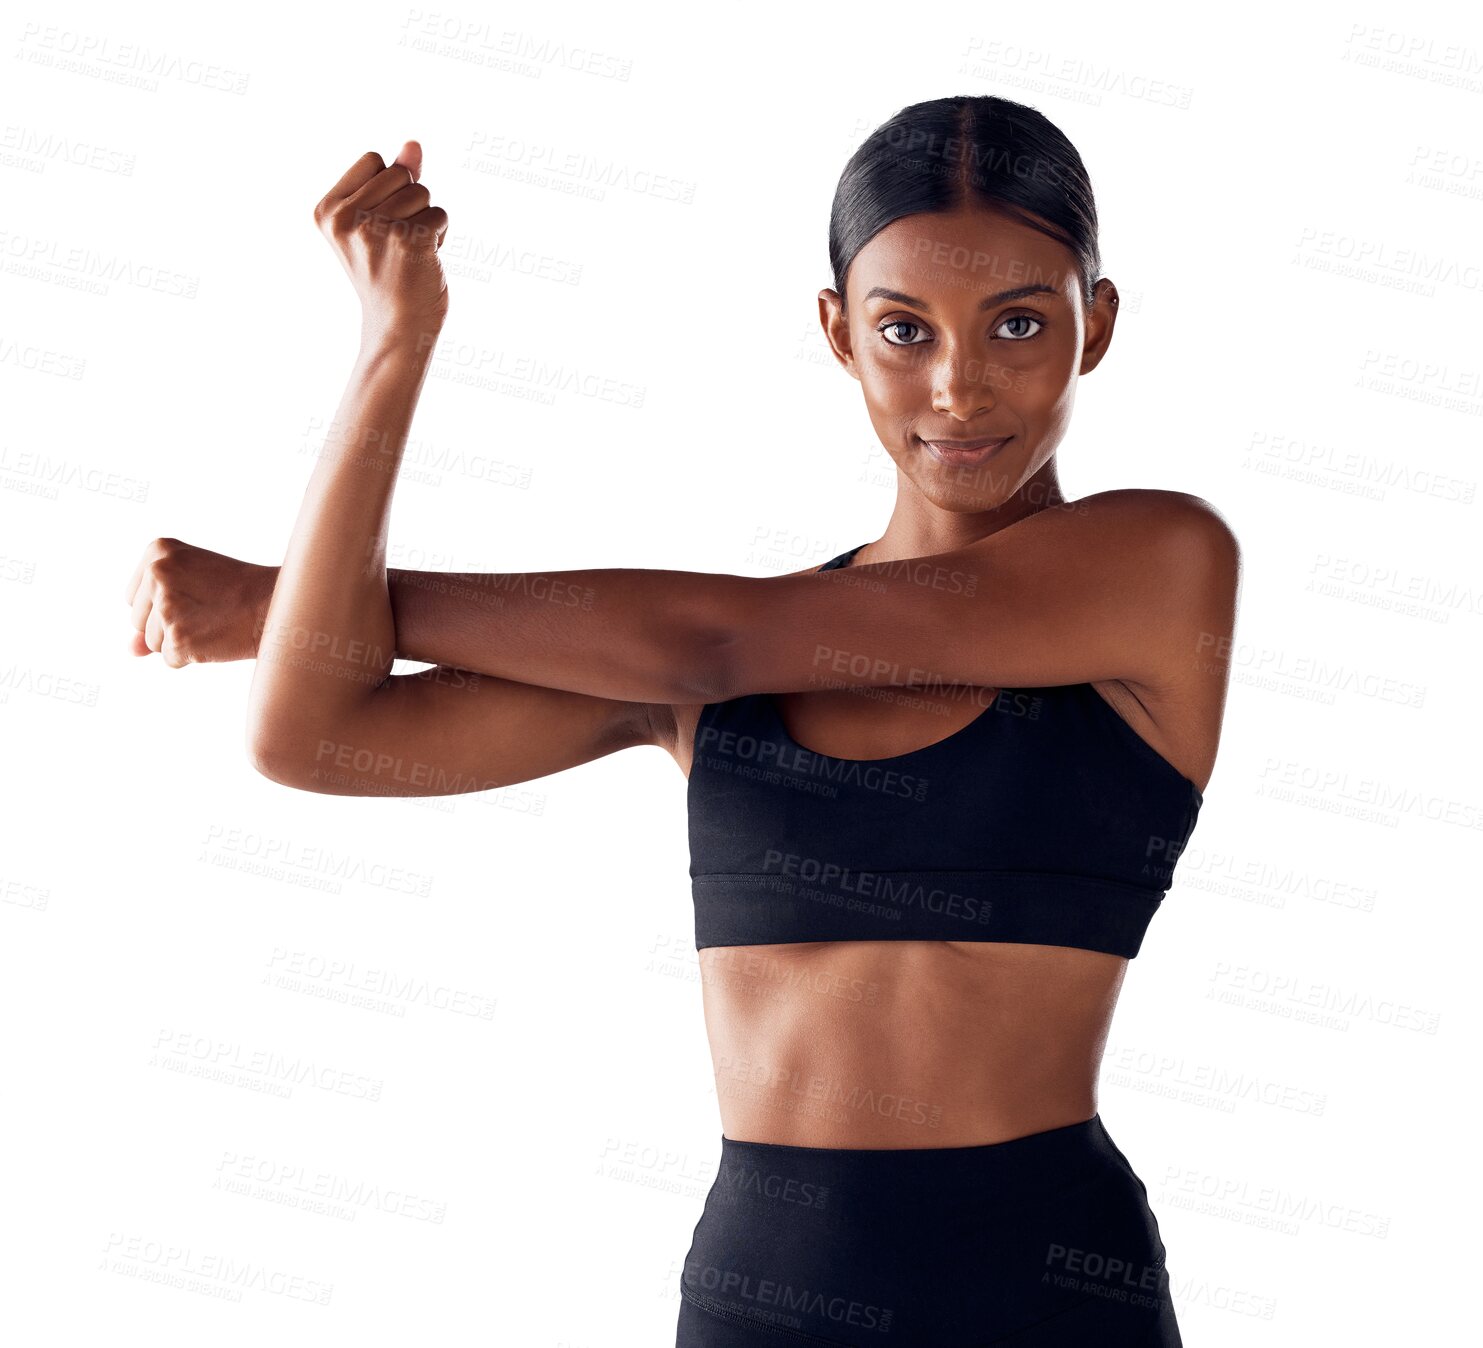 Buy stock photo Fitness, portrait and woman stretching arms for exercise, wellness and body training. Performance, workout and muscle warm up with girl athlete with commitment isolated on transparent png background.